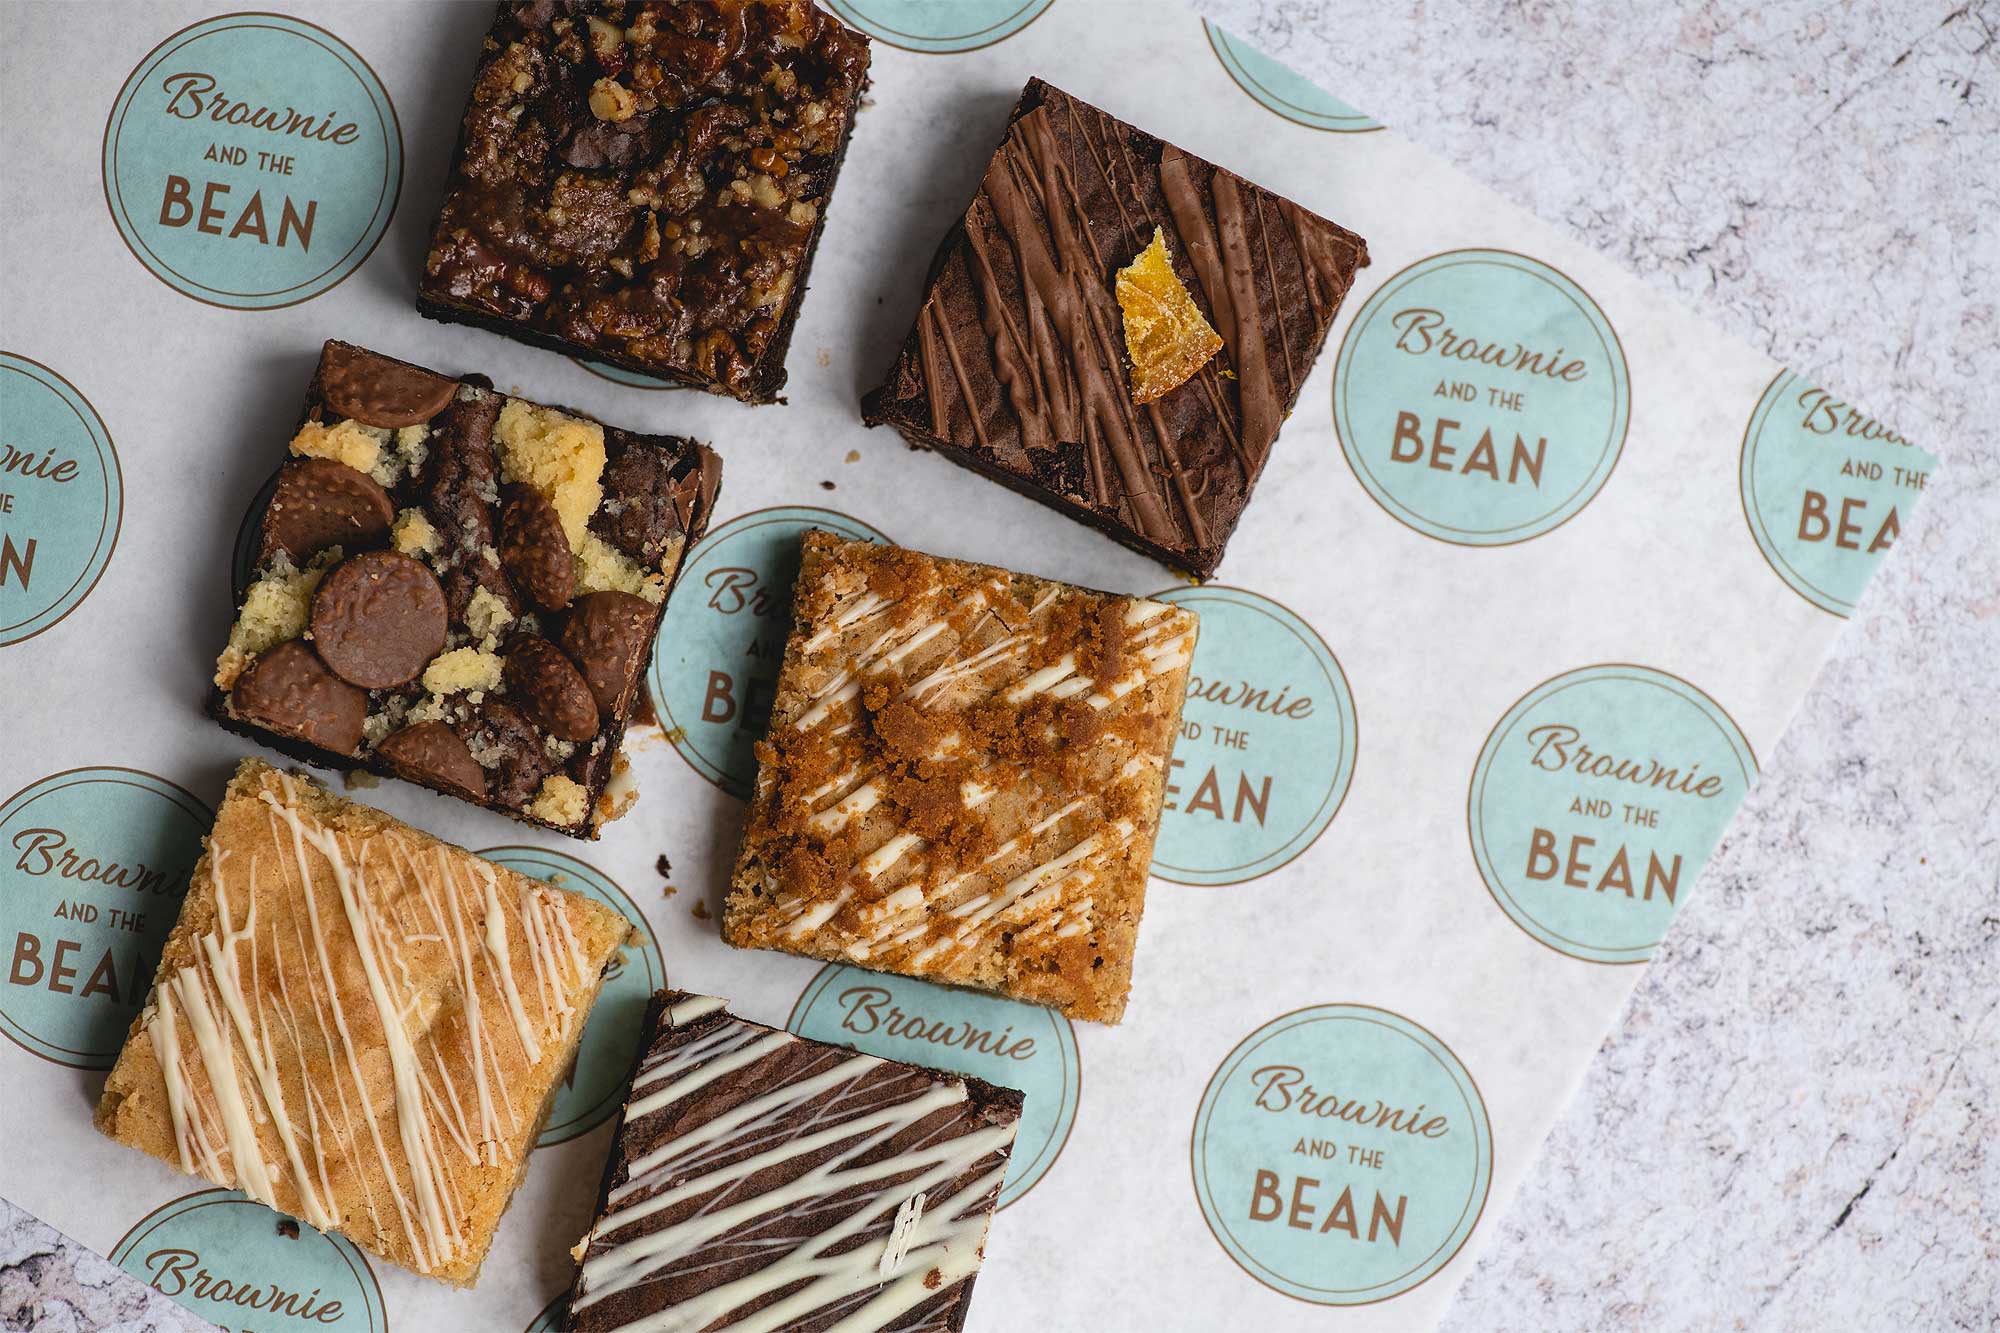 A laid out shot of our brownie deliveries by post. Photo contains our Mixed box of chocolate brownies on a printed greaseproof background